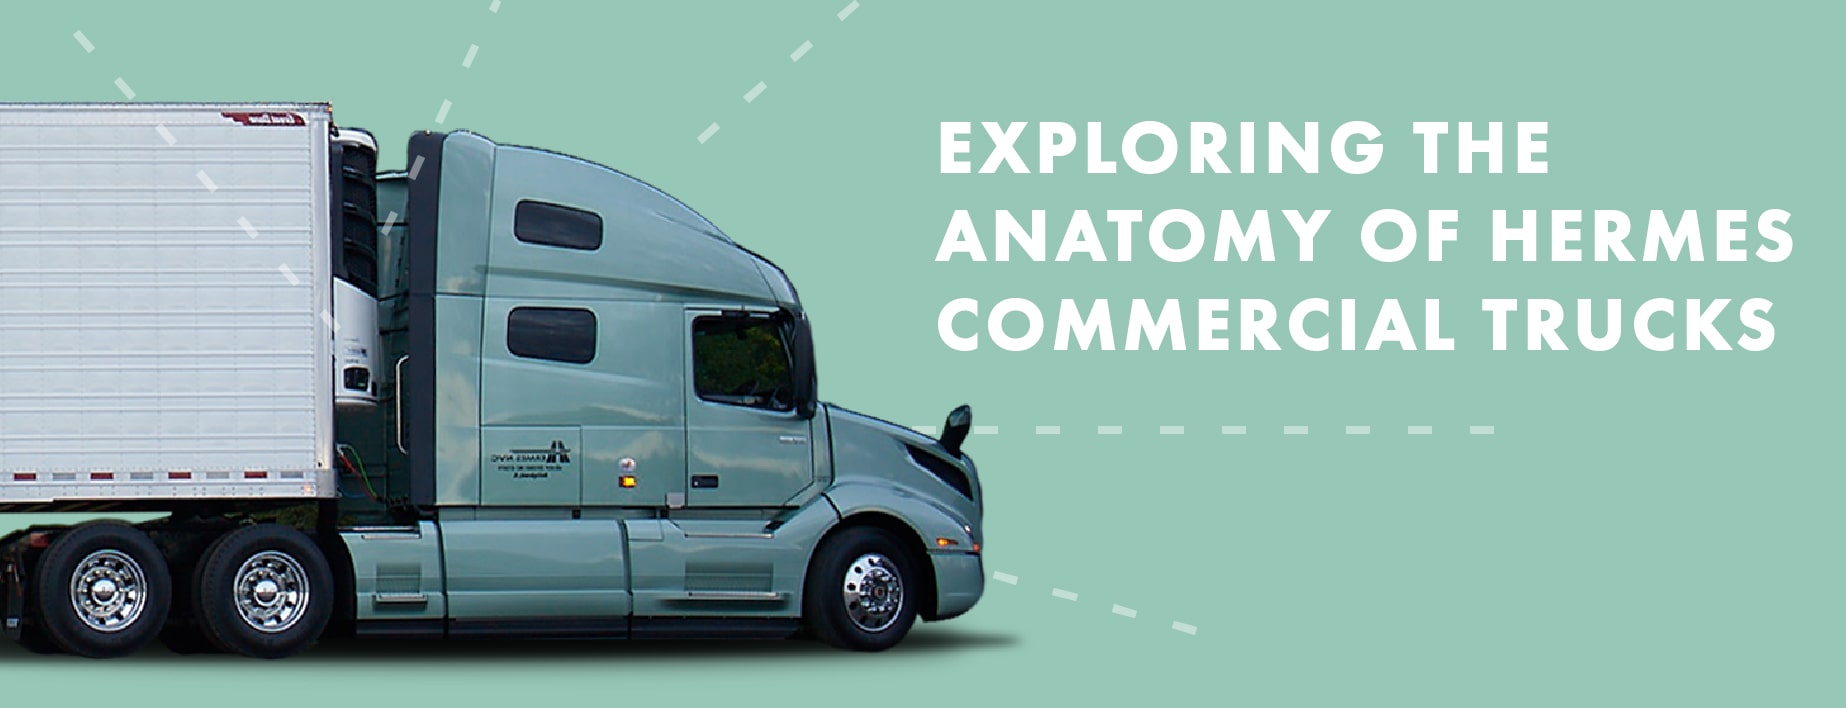 Exploring the Anatomy of Hermes Commercial Trucks and Our Safety Commitment